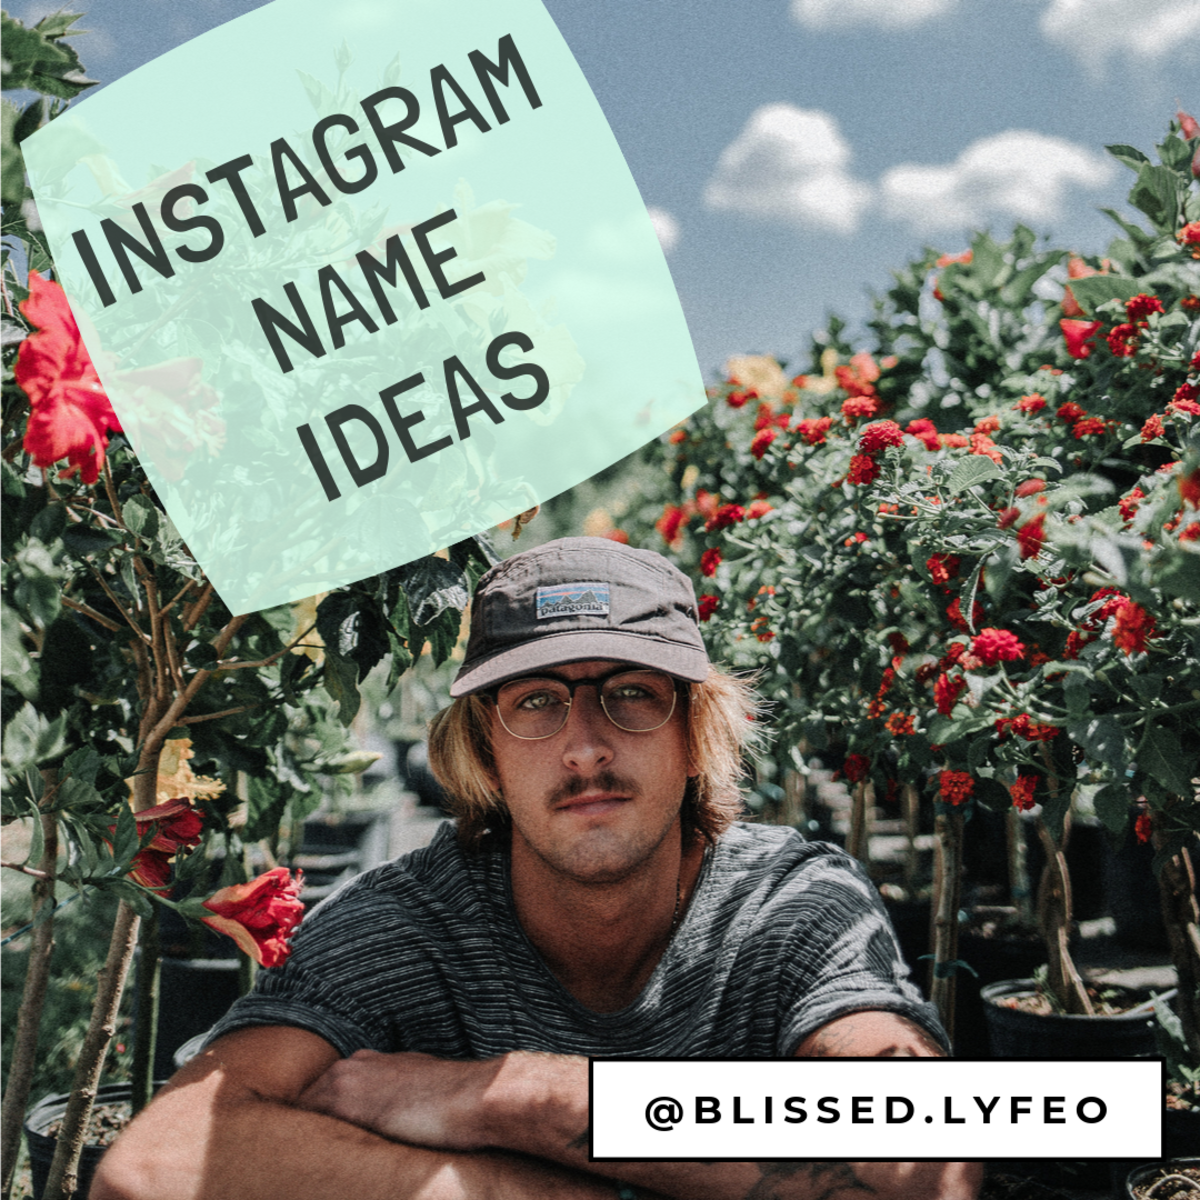 200+ Creative Instagram Name Ideas and Handles for Insta-Fame